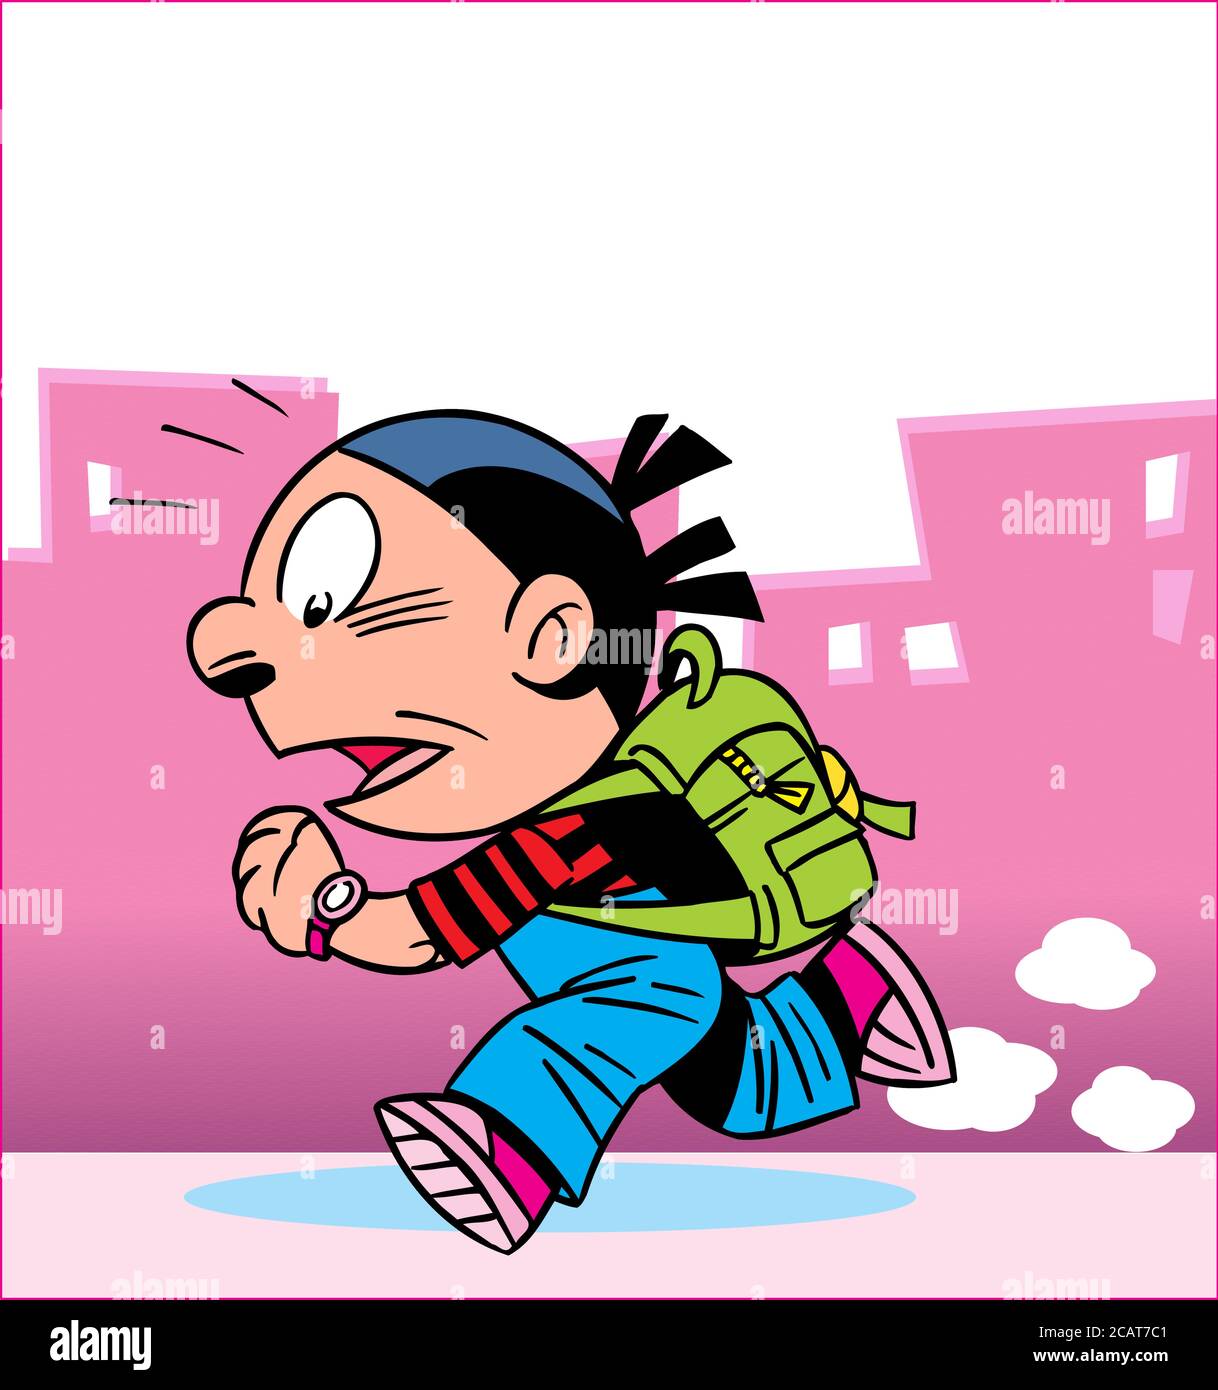 In the vector illustration, a schoolgirl girl with a backpack hurries to school down the street. Illustration is made in cartoon style Stock Vector